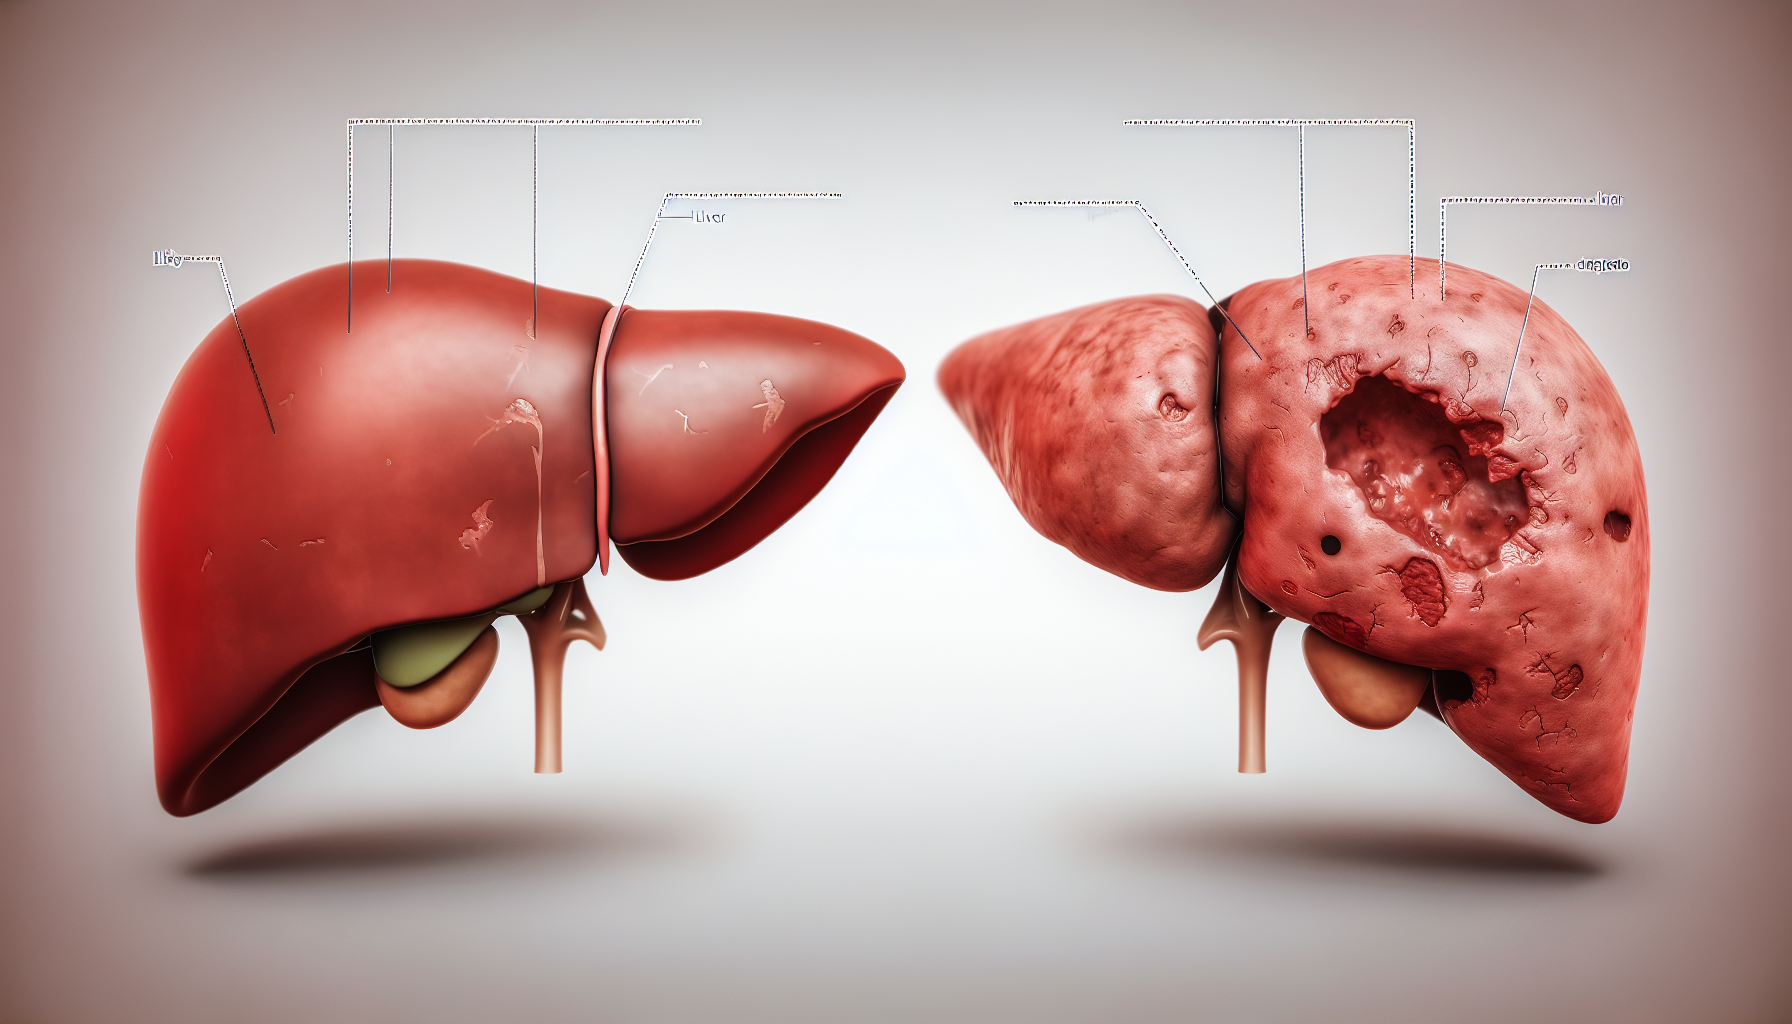 Liver damage due to alcohol abuse